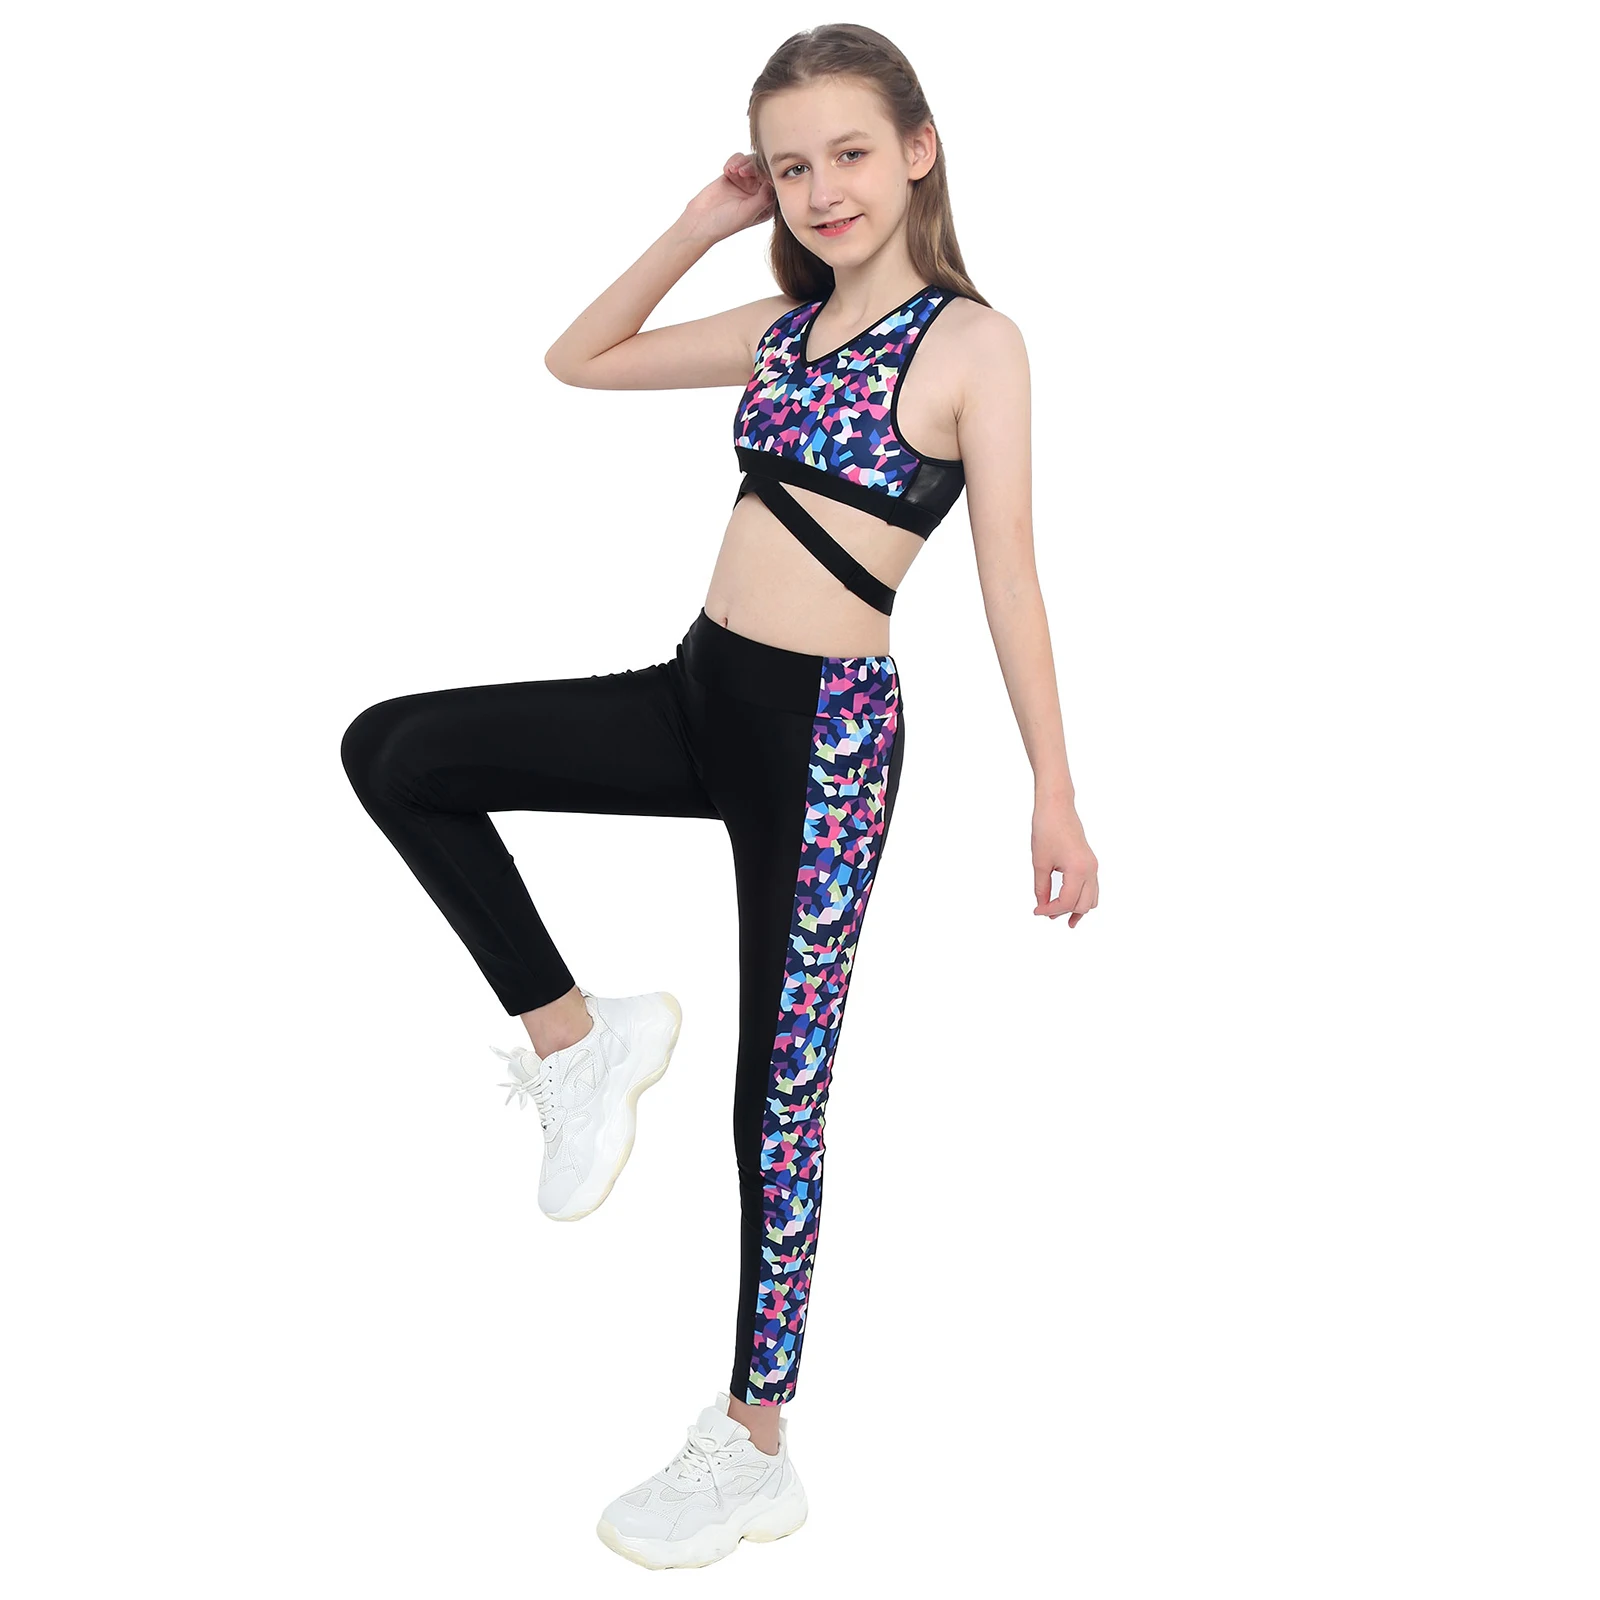 MSemis Kids Girls Crop Tops Athletic Leggings Workout Set 2 Pieces Summer Tracksuit Gym Yoga Dance Sports Outfits Set 